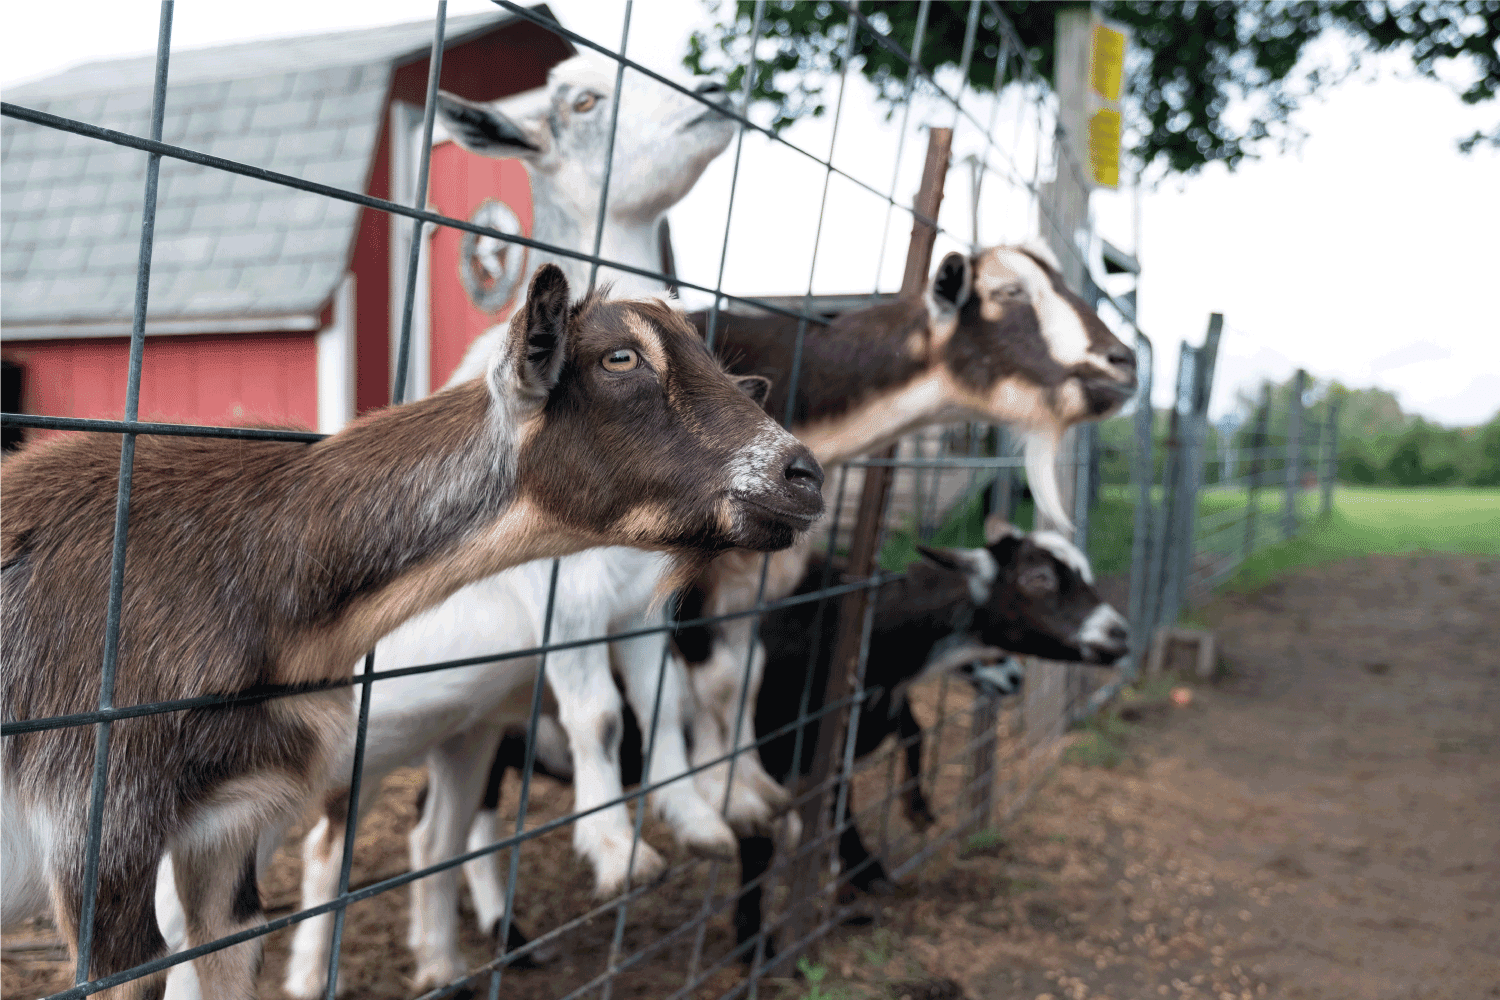 Three domestic goats behind the fence waiting for food